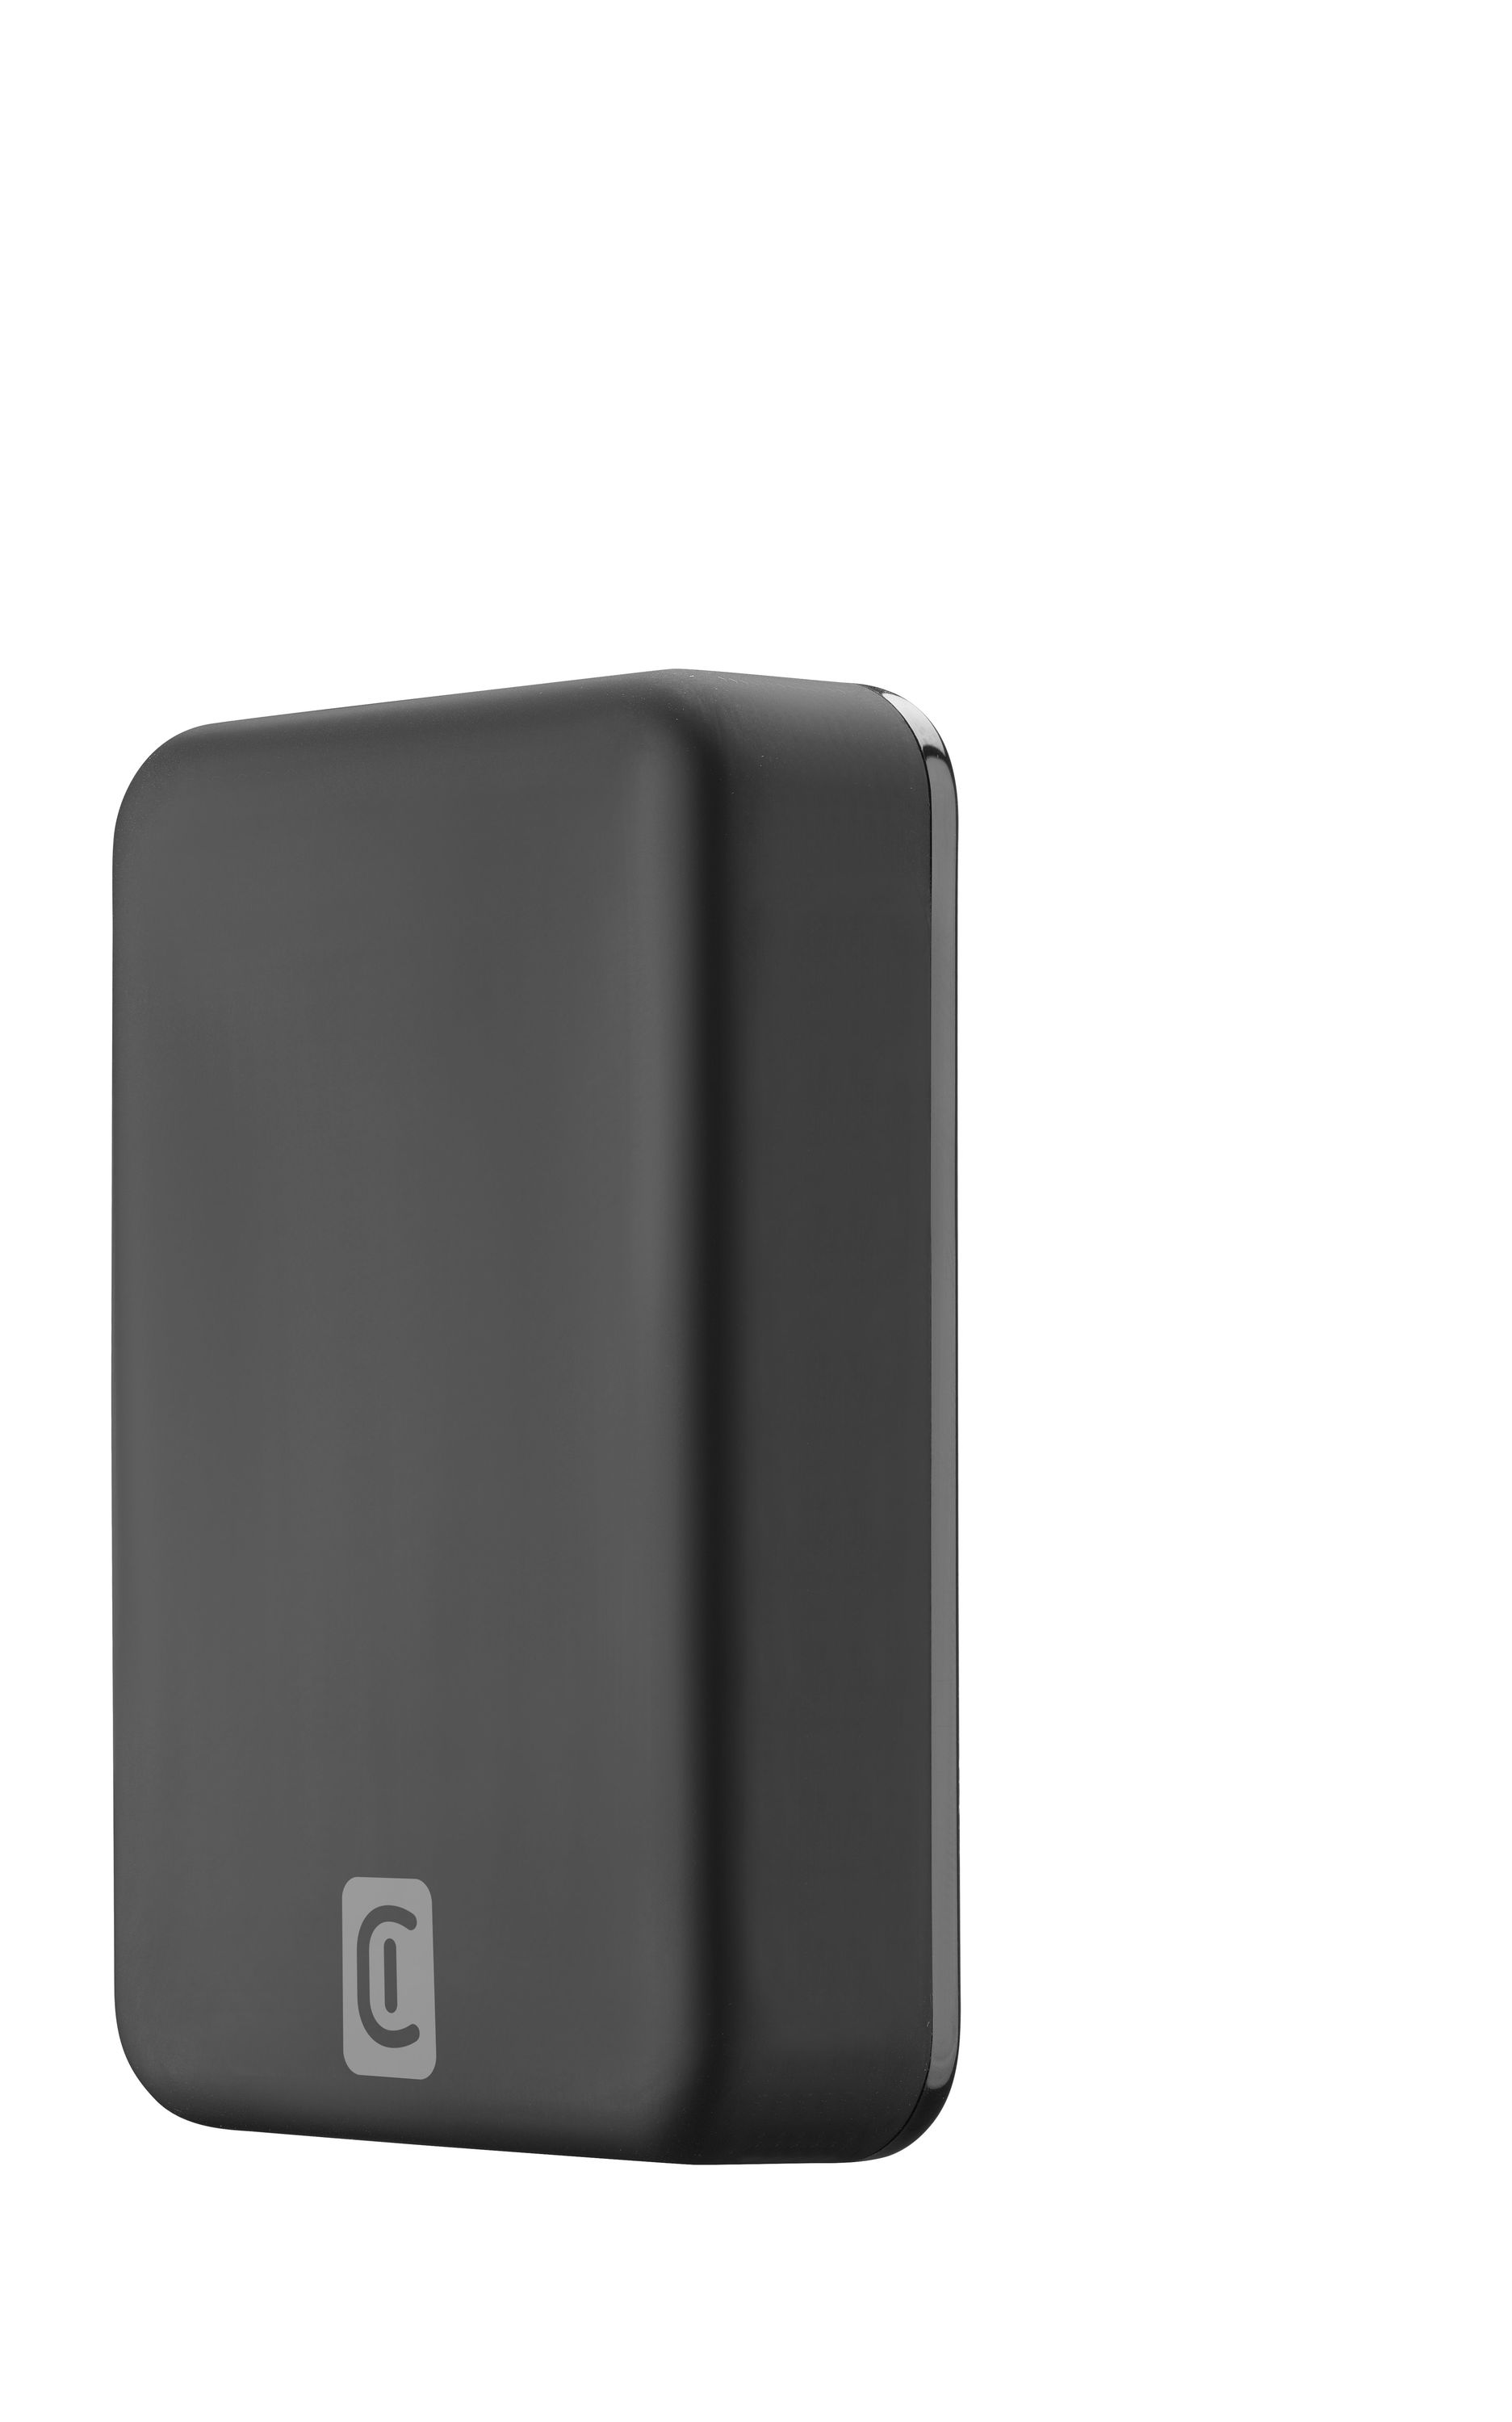 Wireless power bank MAG 10000, Portable Battery Chargers